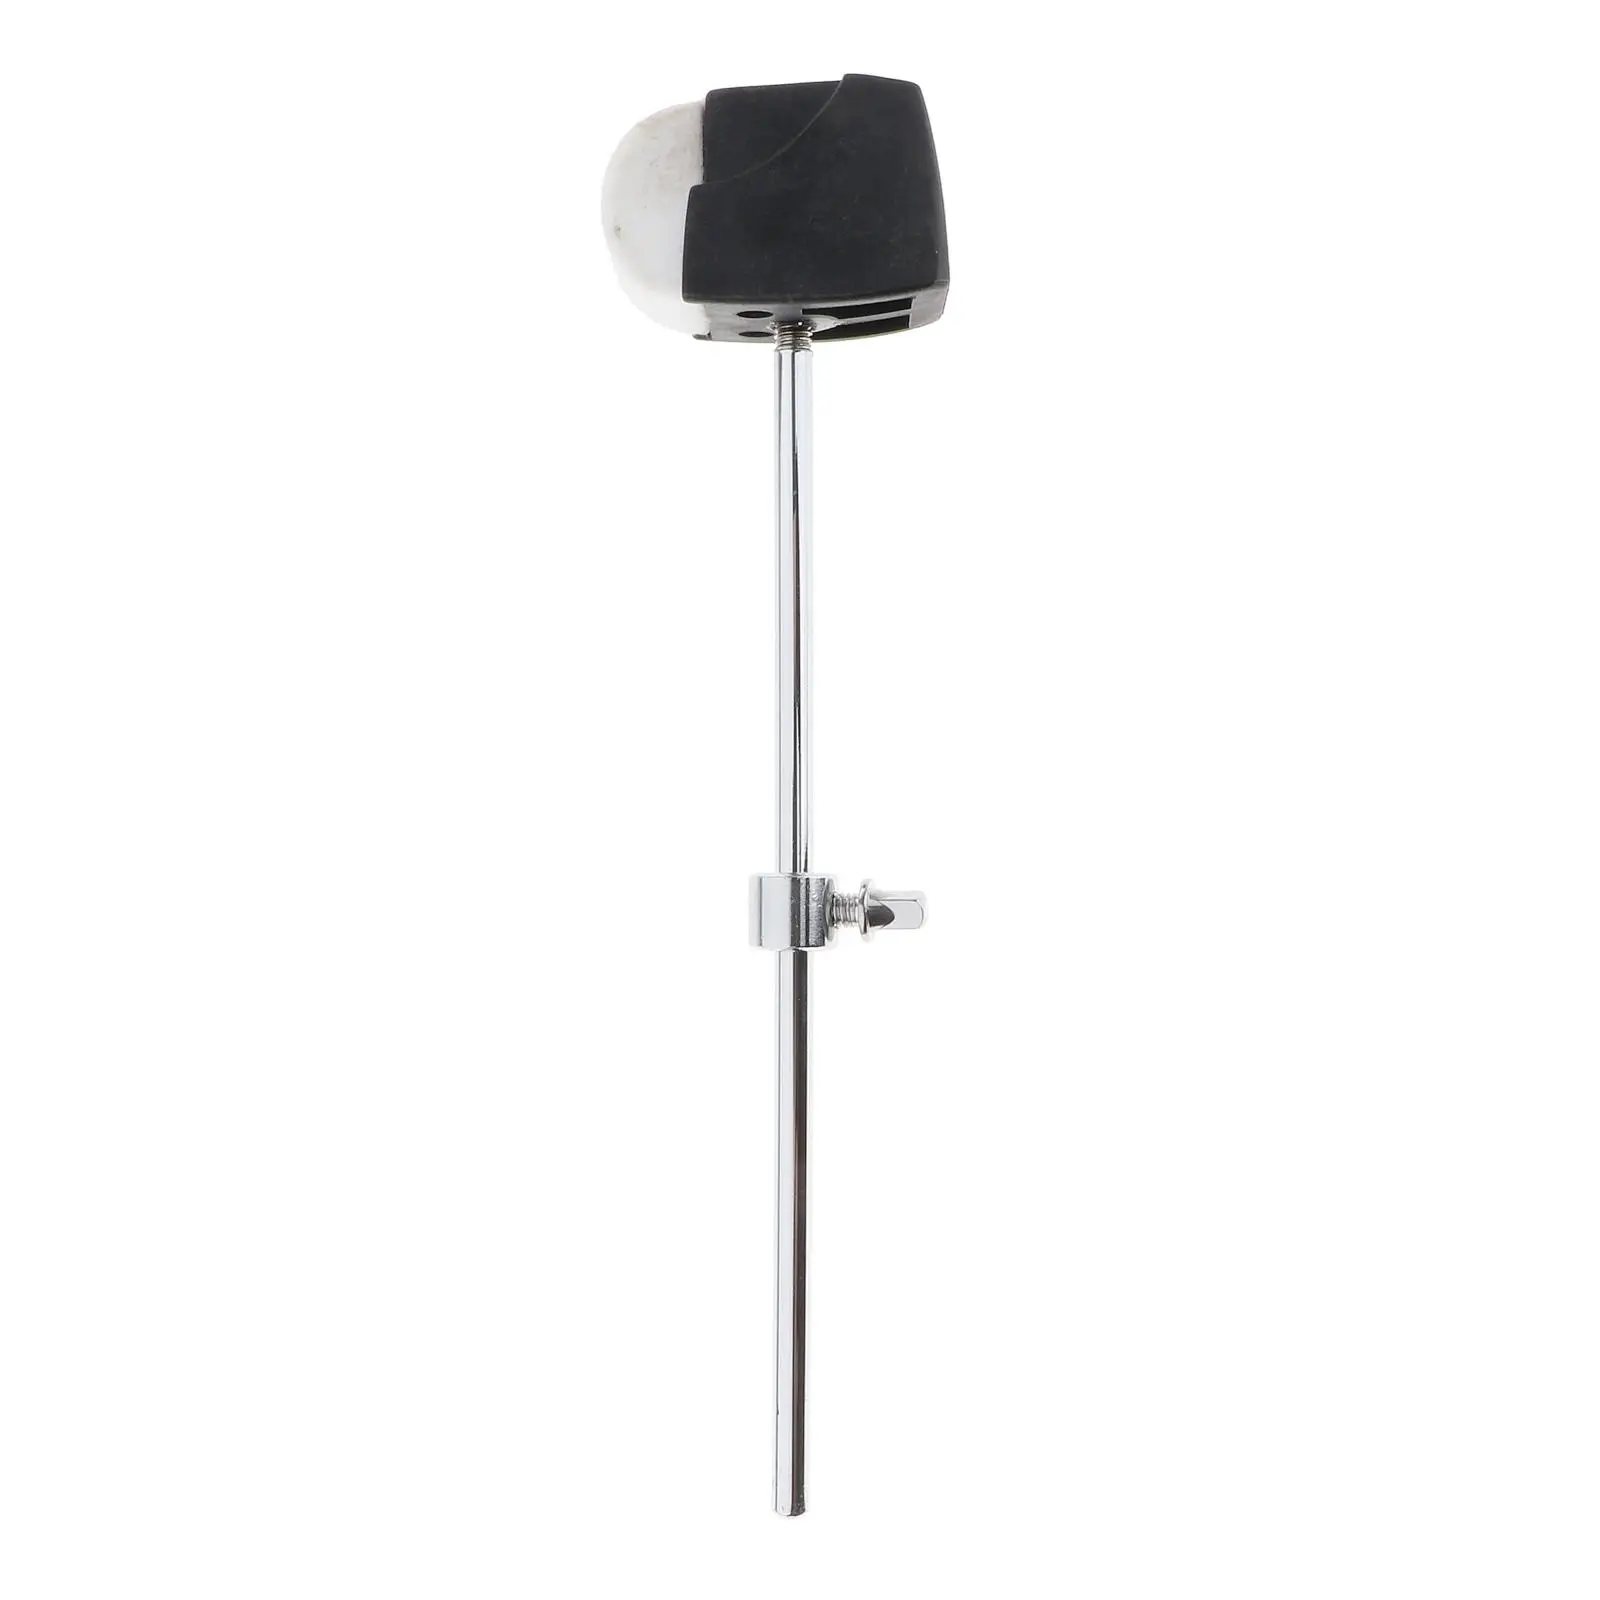 Durable Felt Bass Drum Pedal Beater Head Kick Drum Mallet Stainless Shank Percussion Instrument Replacement